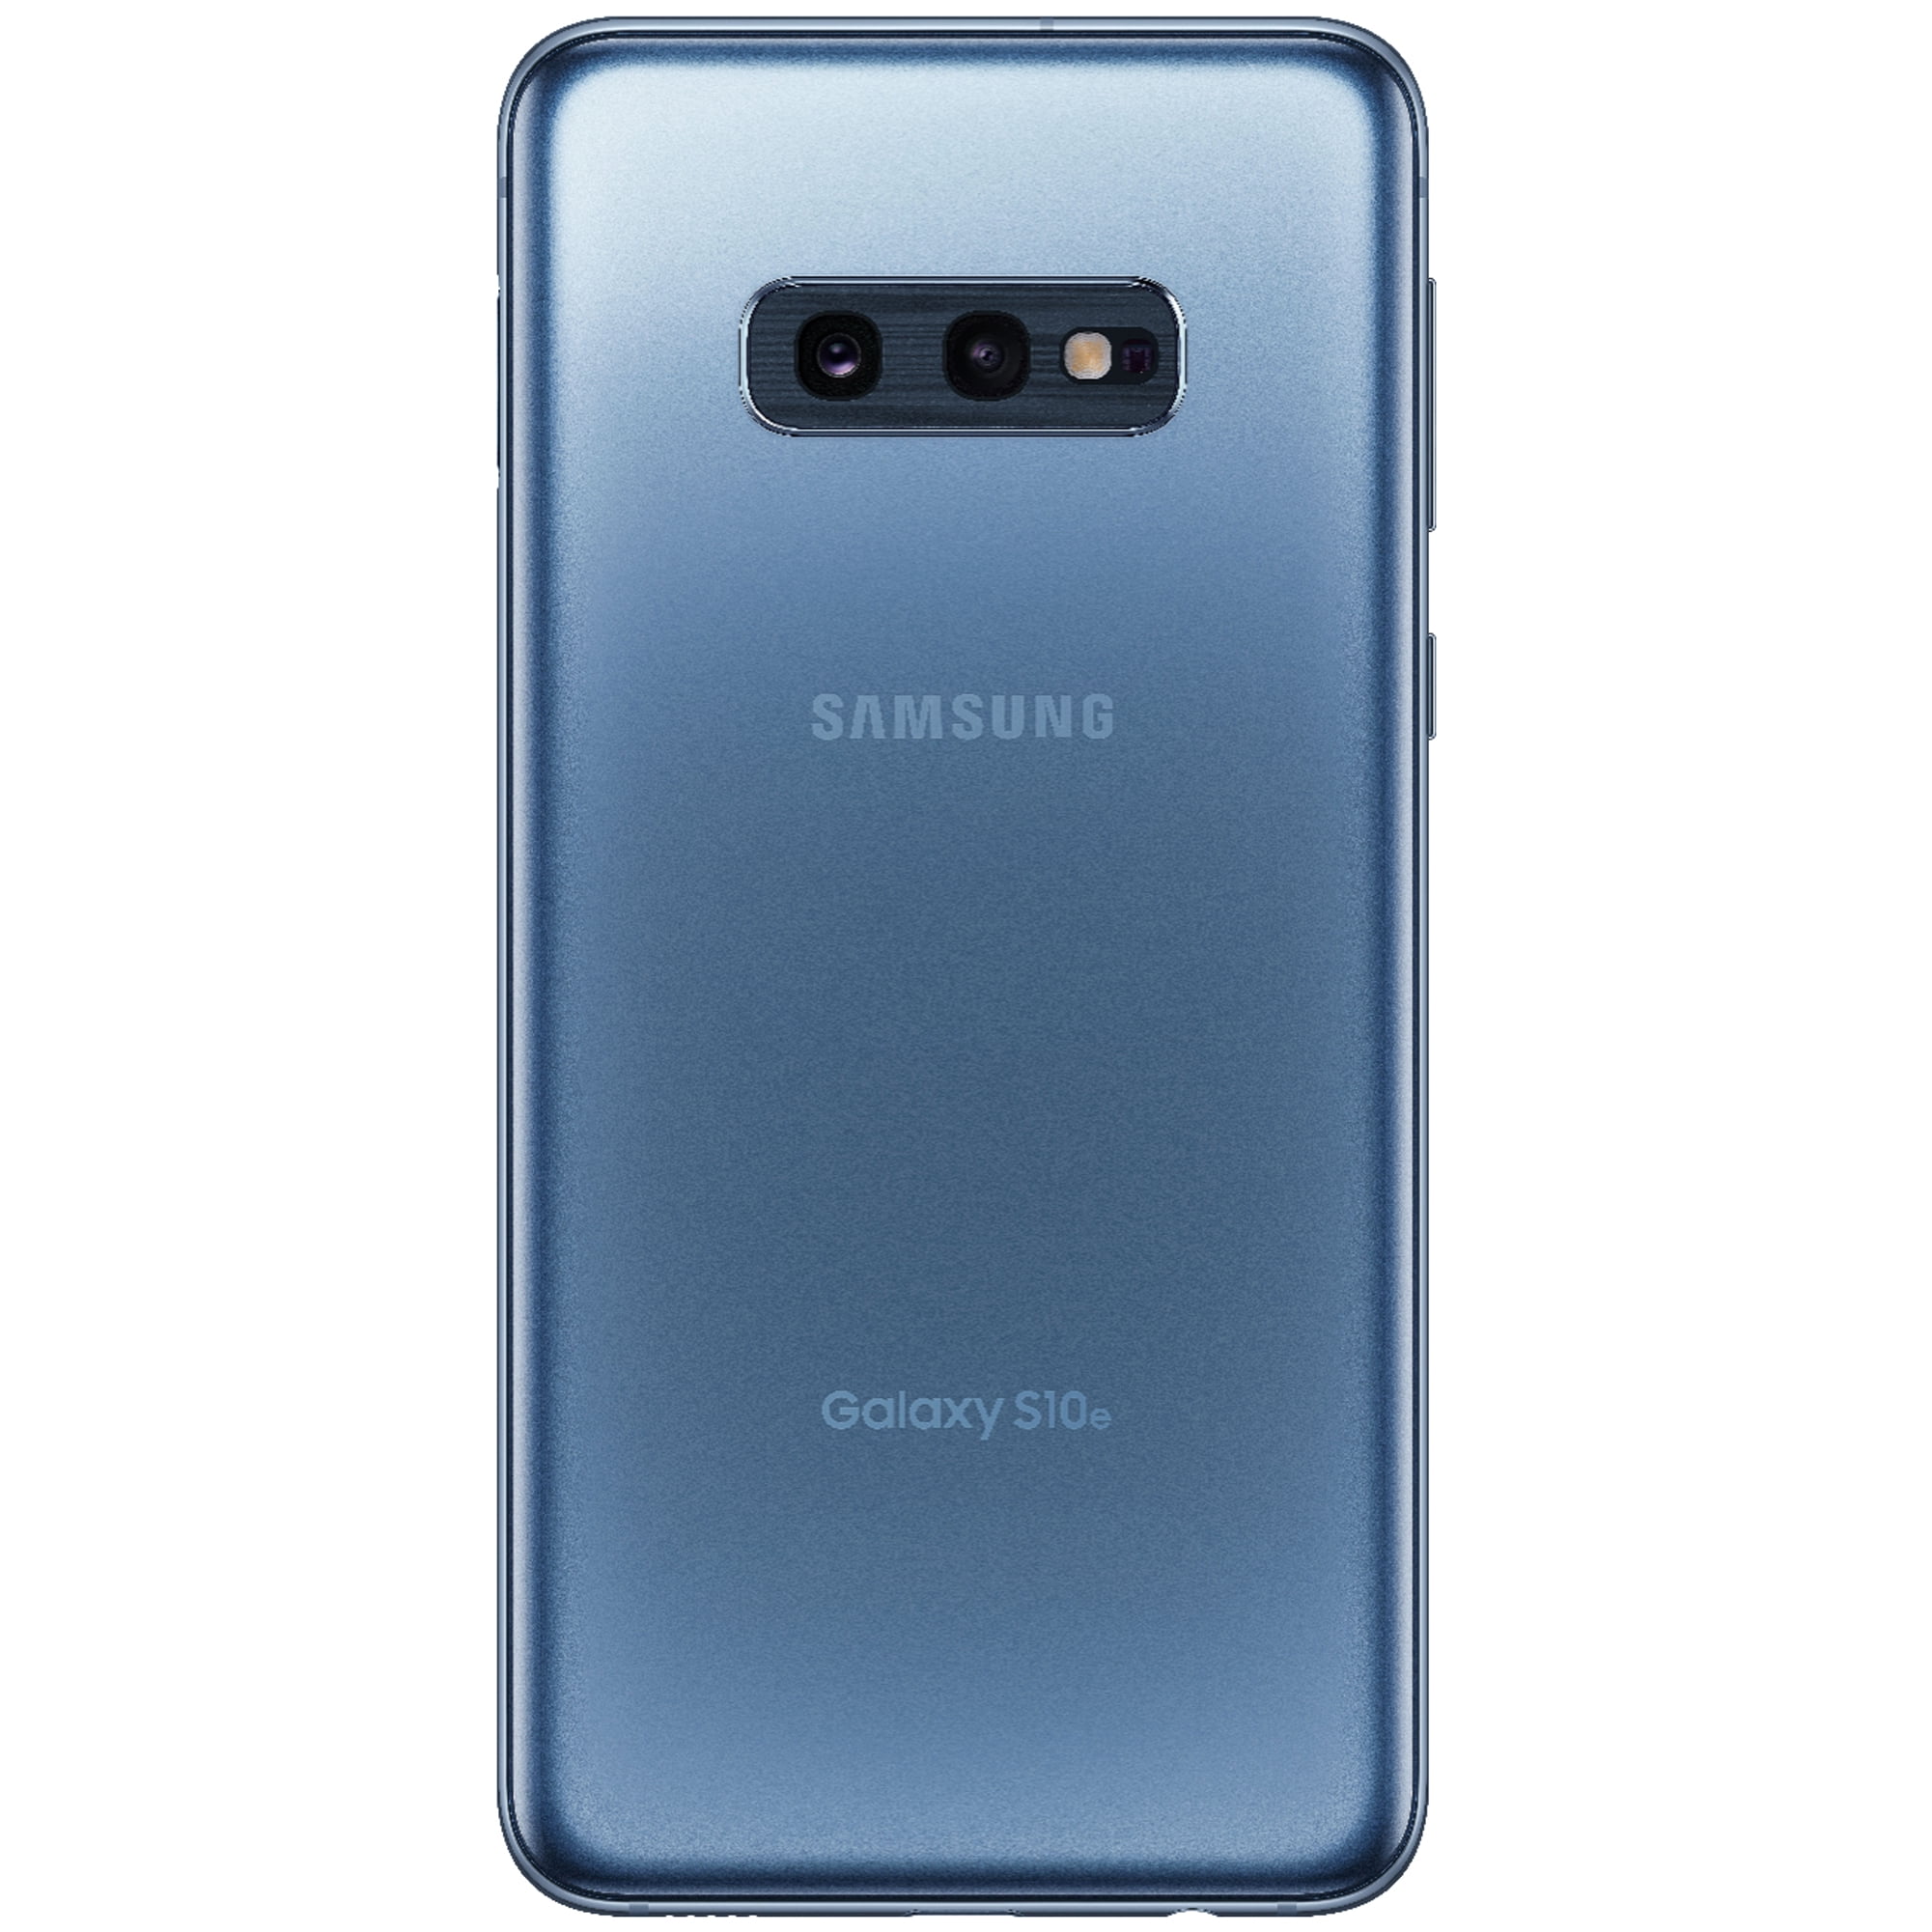 Restored Samsung G970 Galaxy S10e, 128 GB, Prism Blue - Fully Unlocked -  GSM and CDMA compatible (Refurbished) 